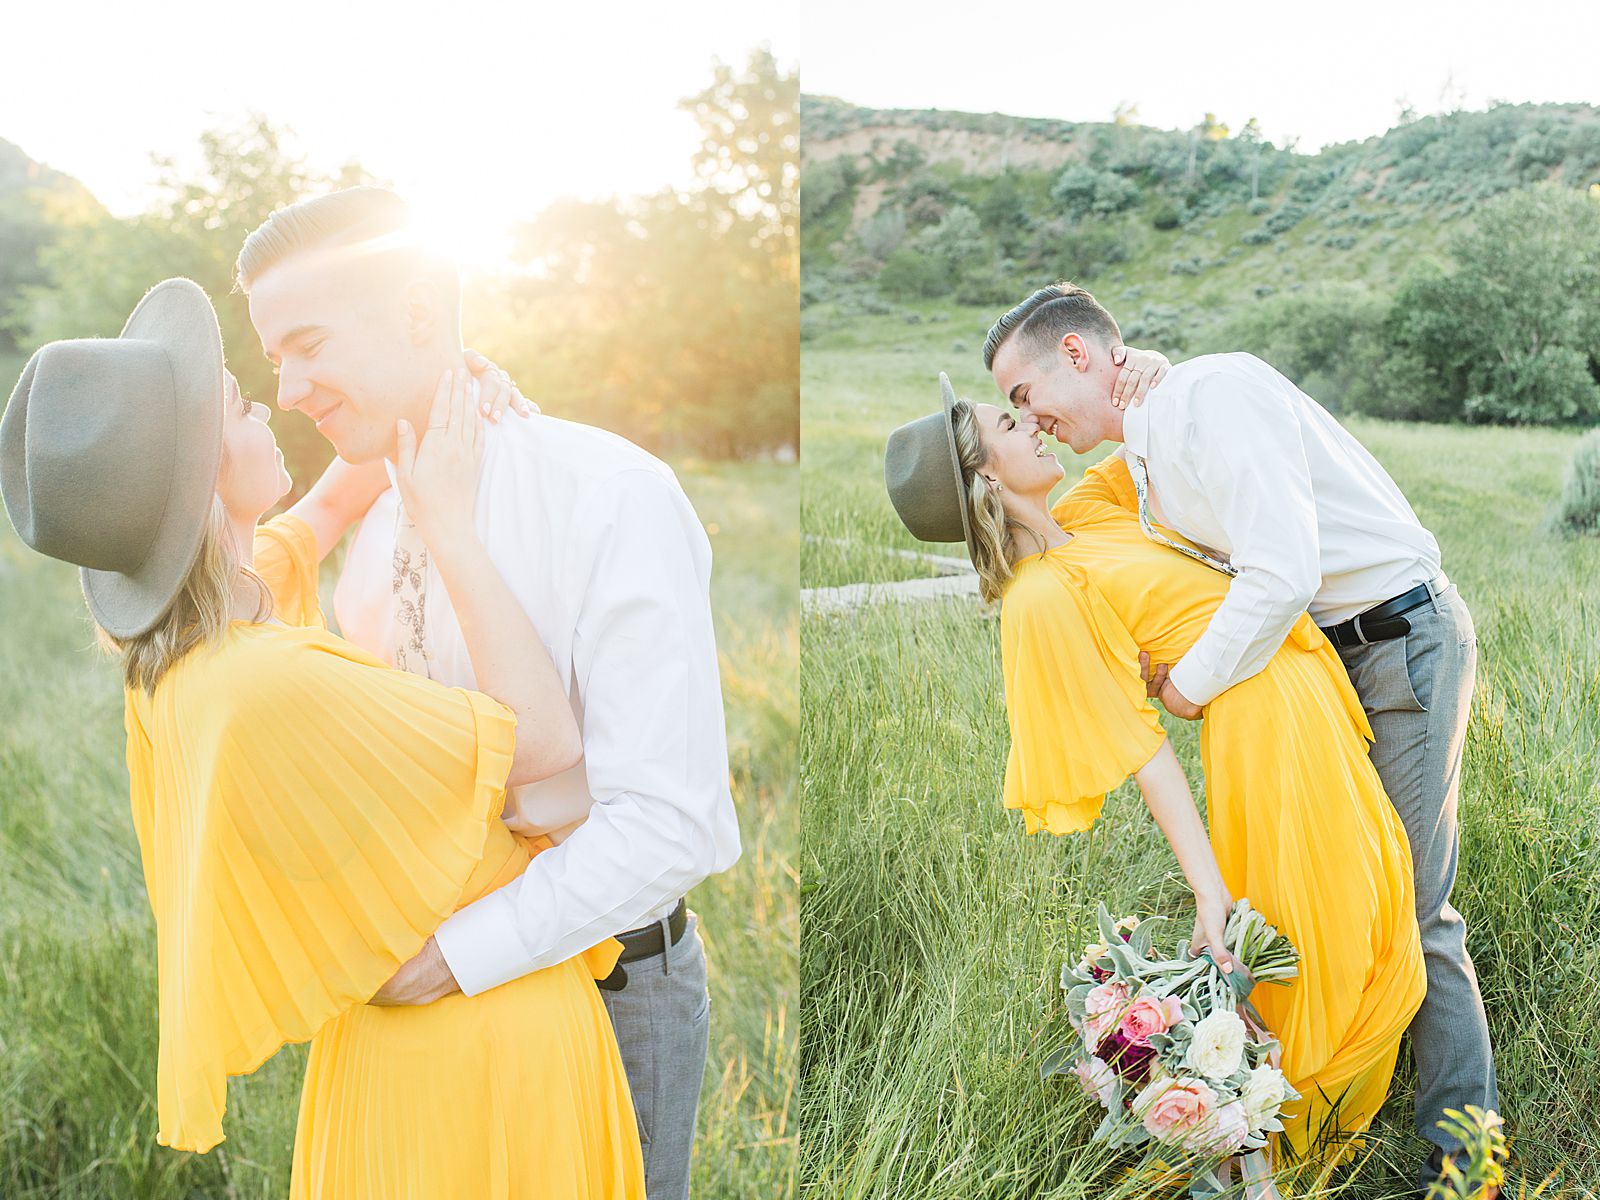 Elegant Engagement Session | Blooms and Branches Bouquet 